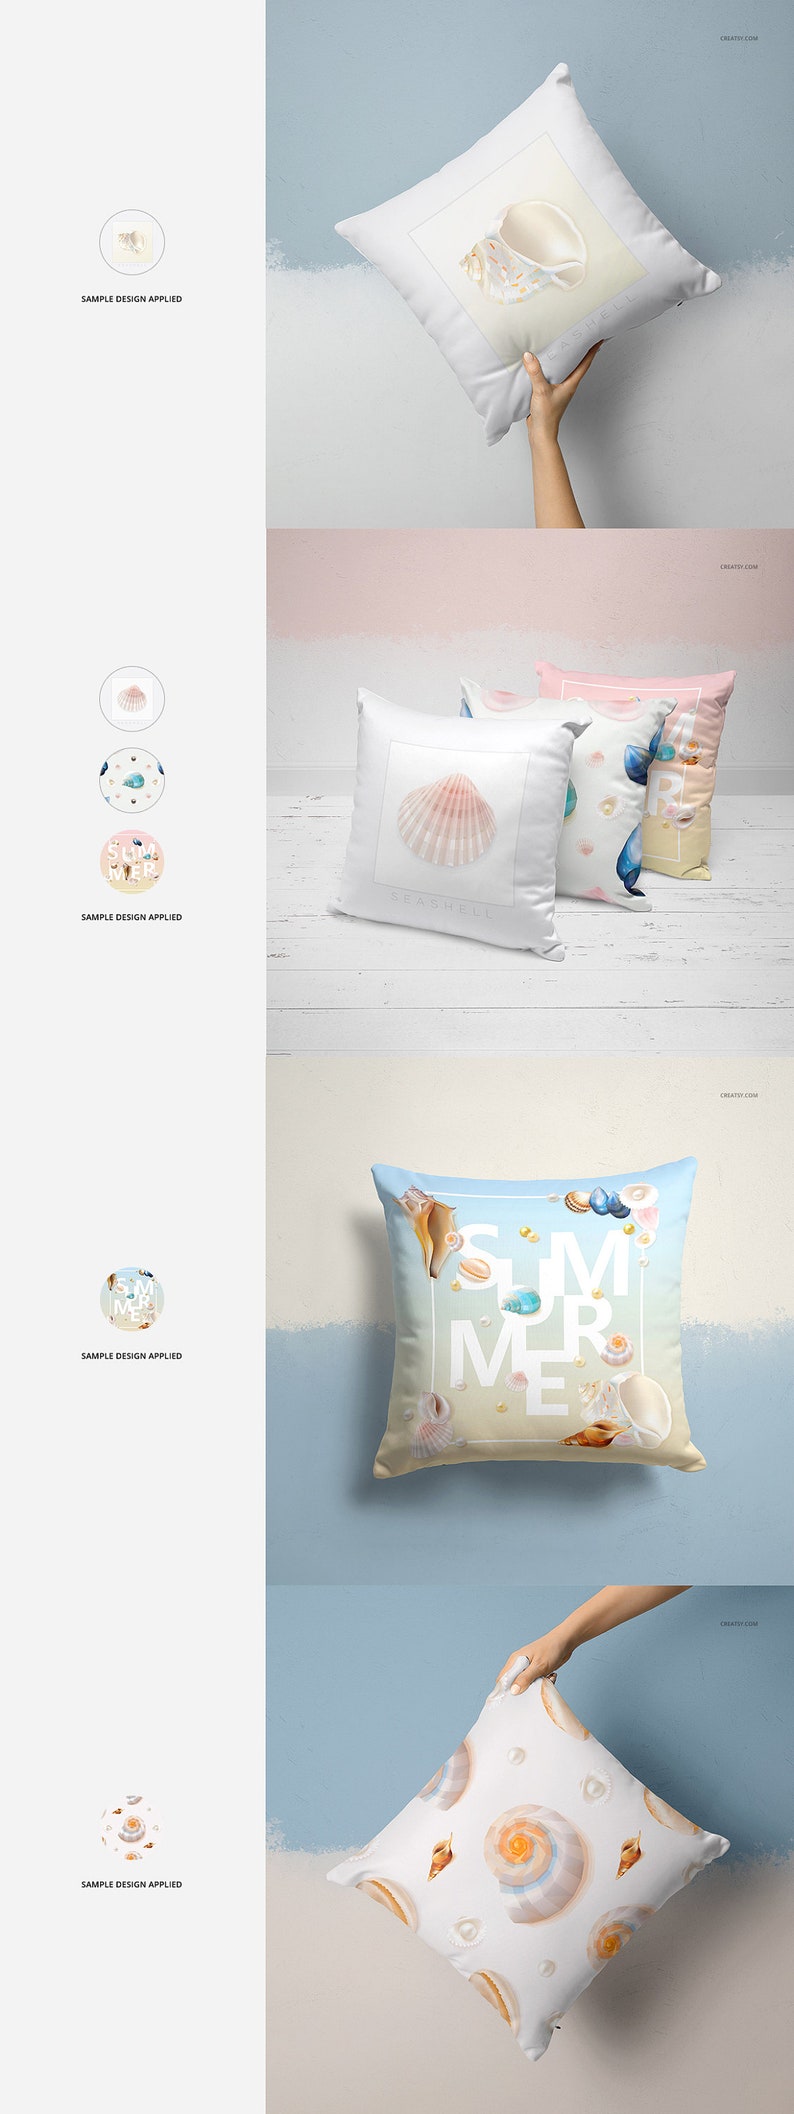 Fabric Factory vol.3: Polyester Throw Pillow Mockup Set, Custom Pillows, cover Template, Pillow In Hands Template, Personalized Pillow, PSD image 4